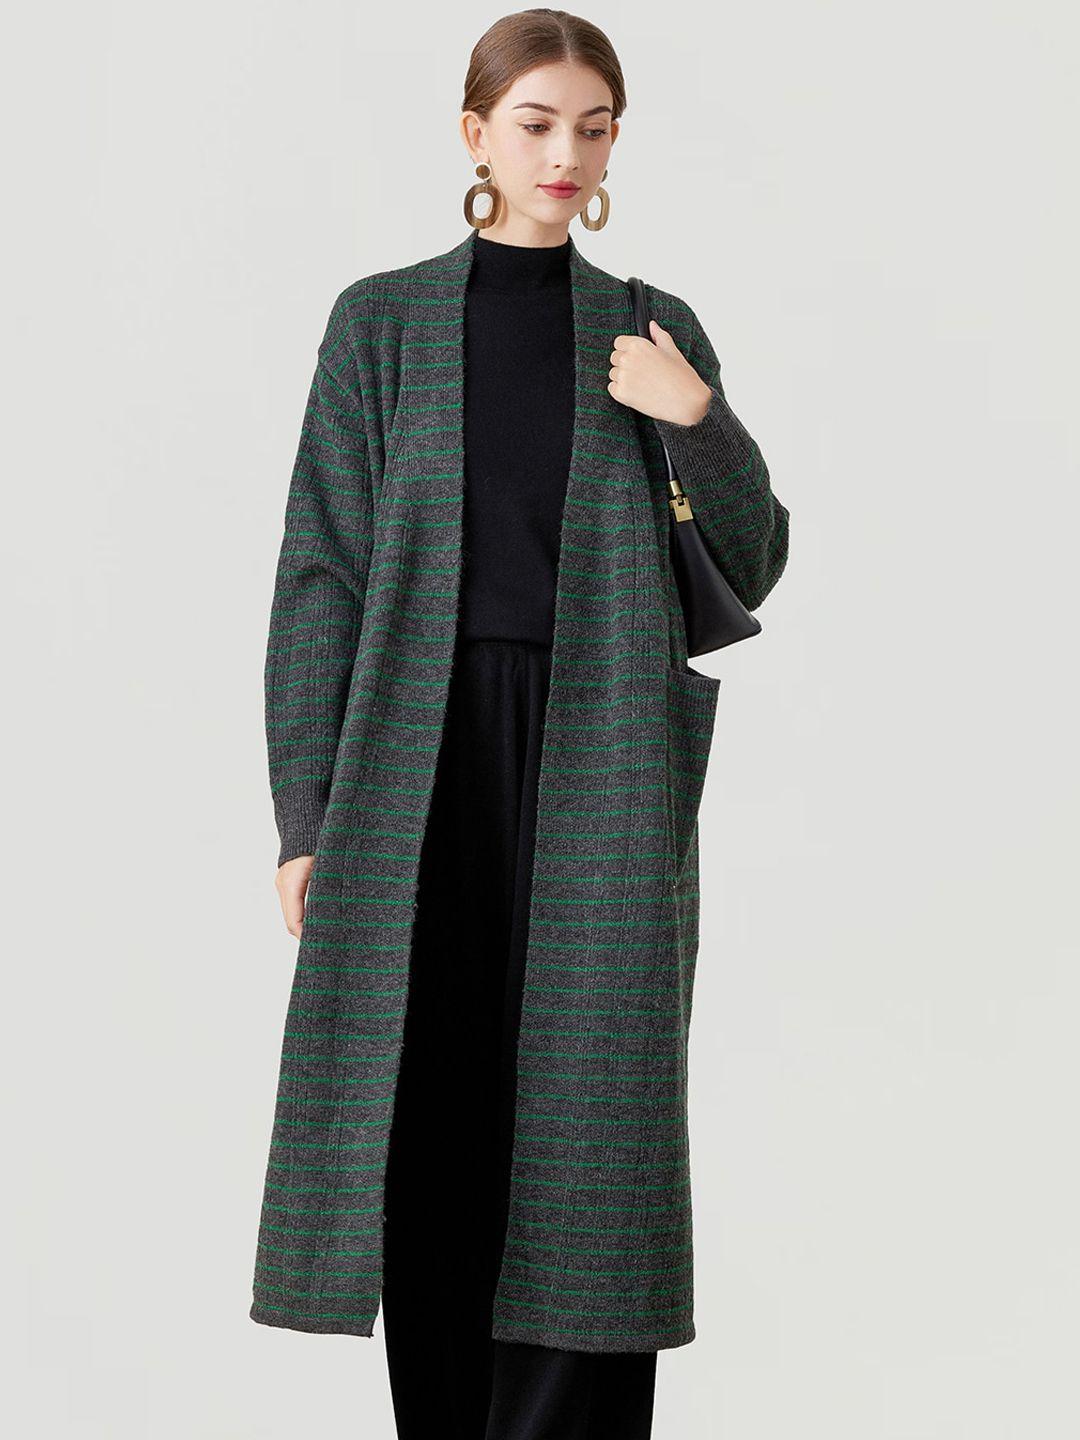 jc collection striped overcoat